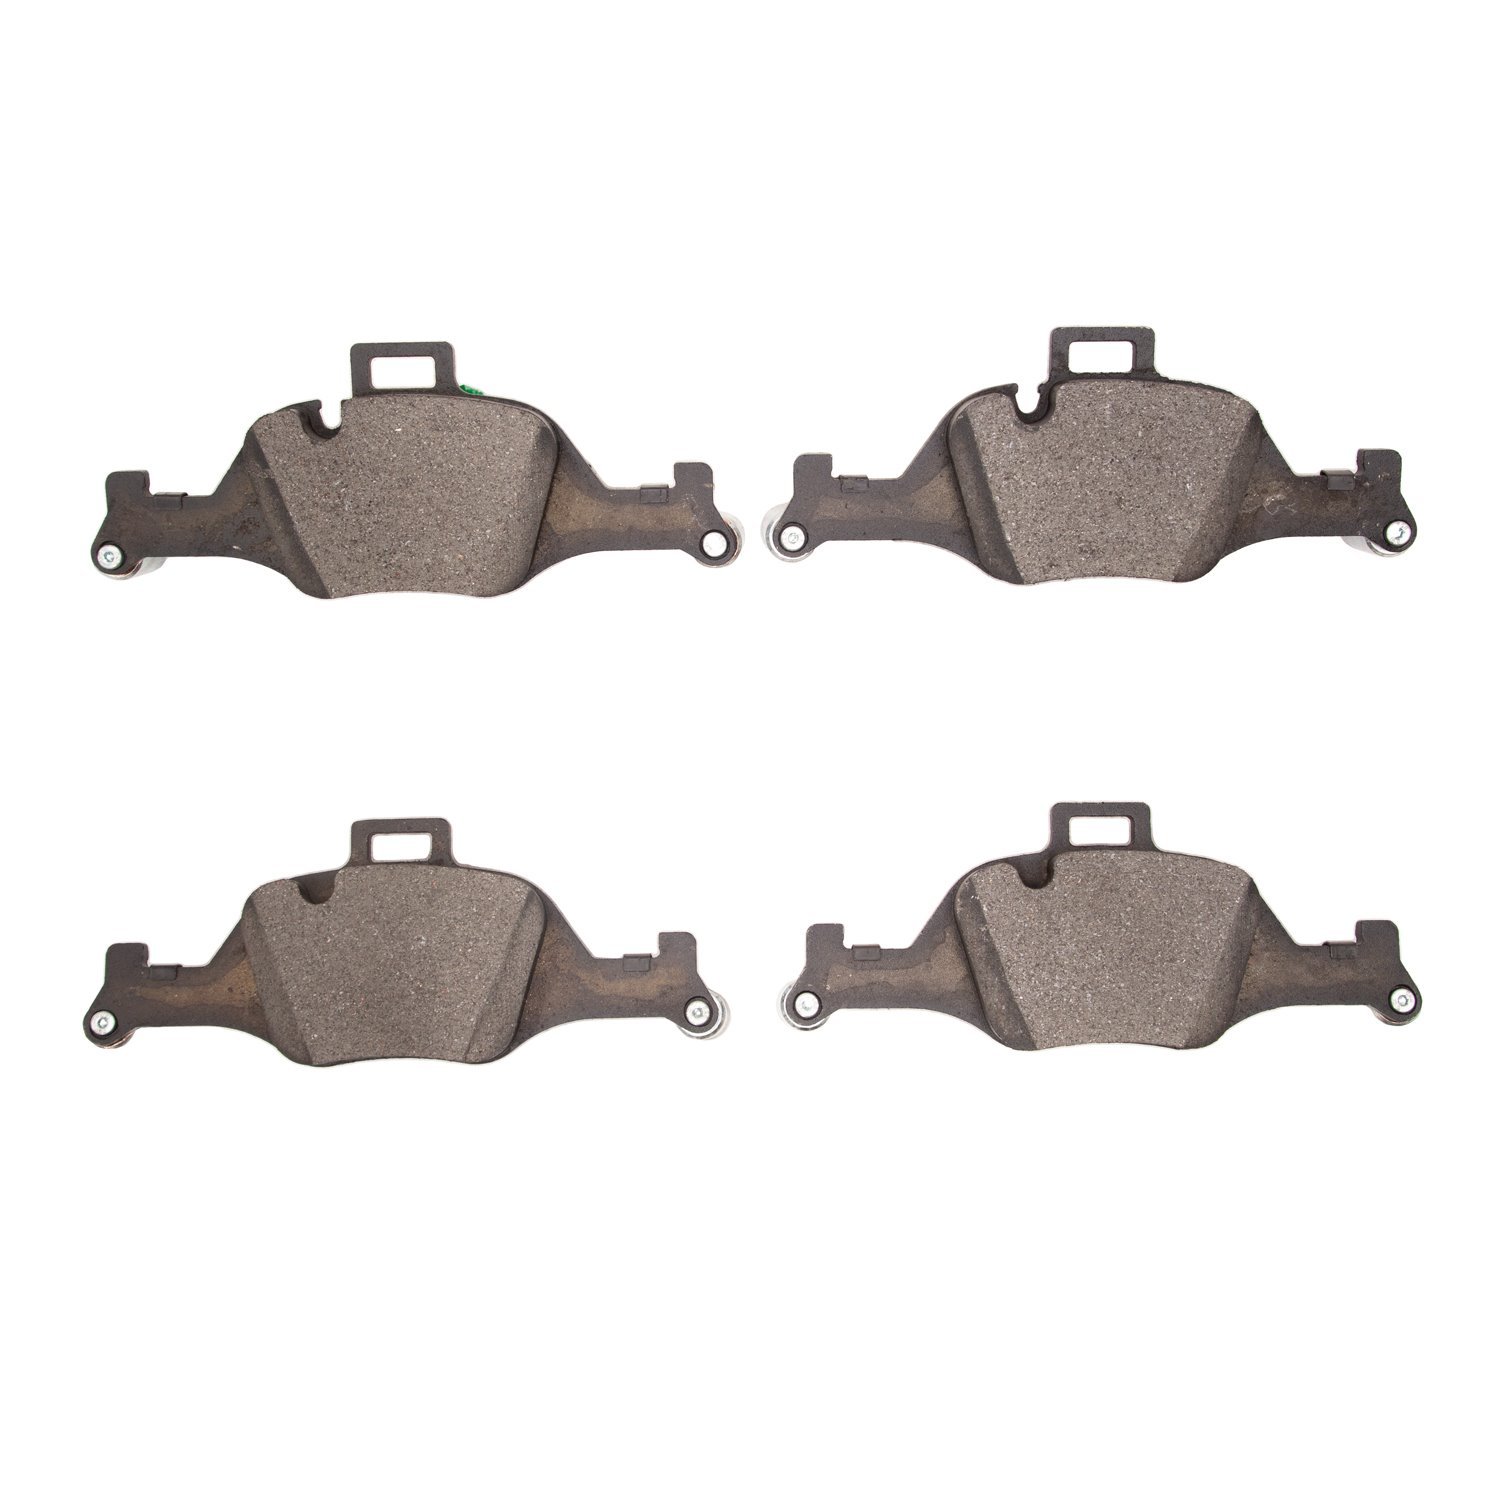 1552-2060-00 5000 Advanced Low-Metallic Brake Pads, Fits Select BMW, Position: Front